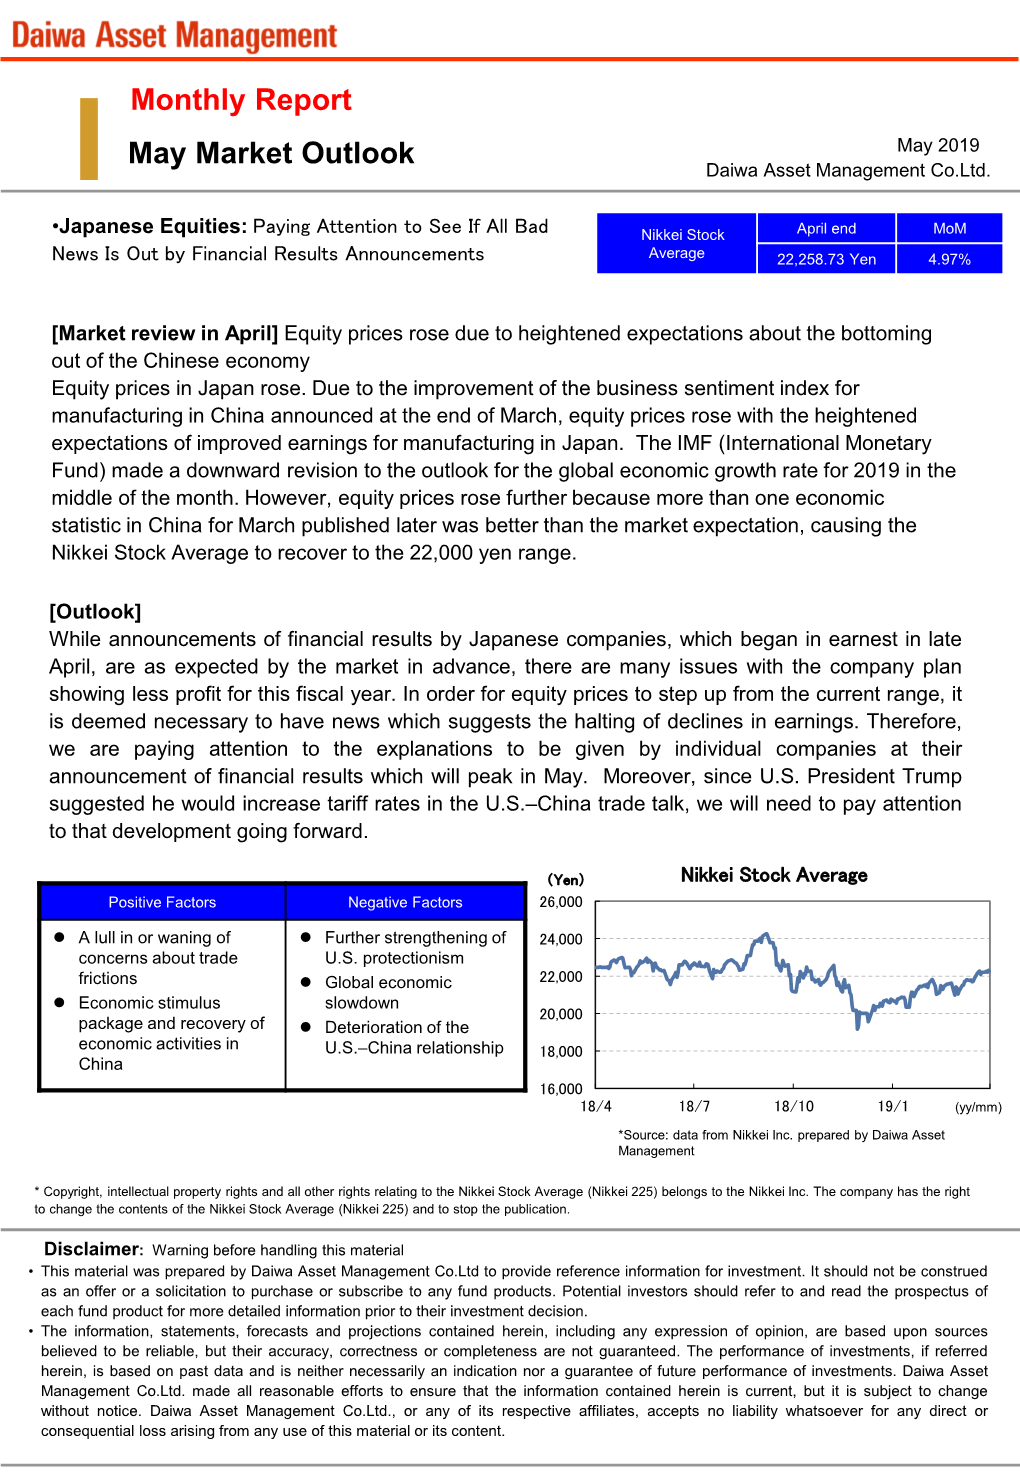 Monthly Report May Market Outlook May 2019 Daiwa Asset Management Co.Ltd